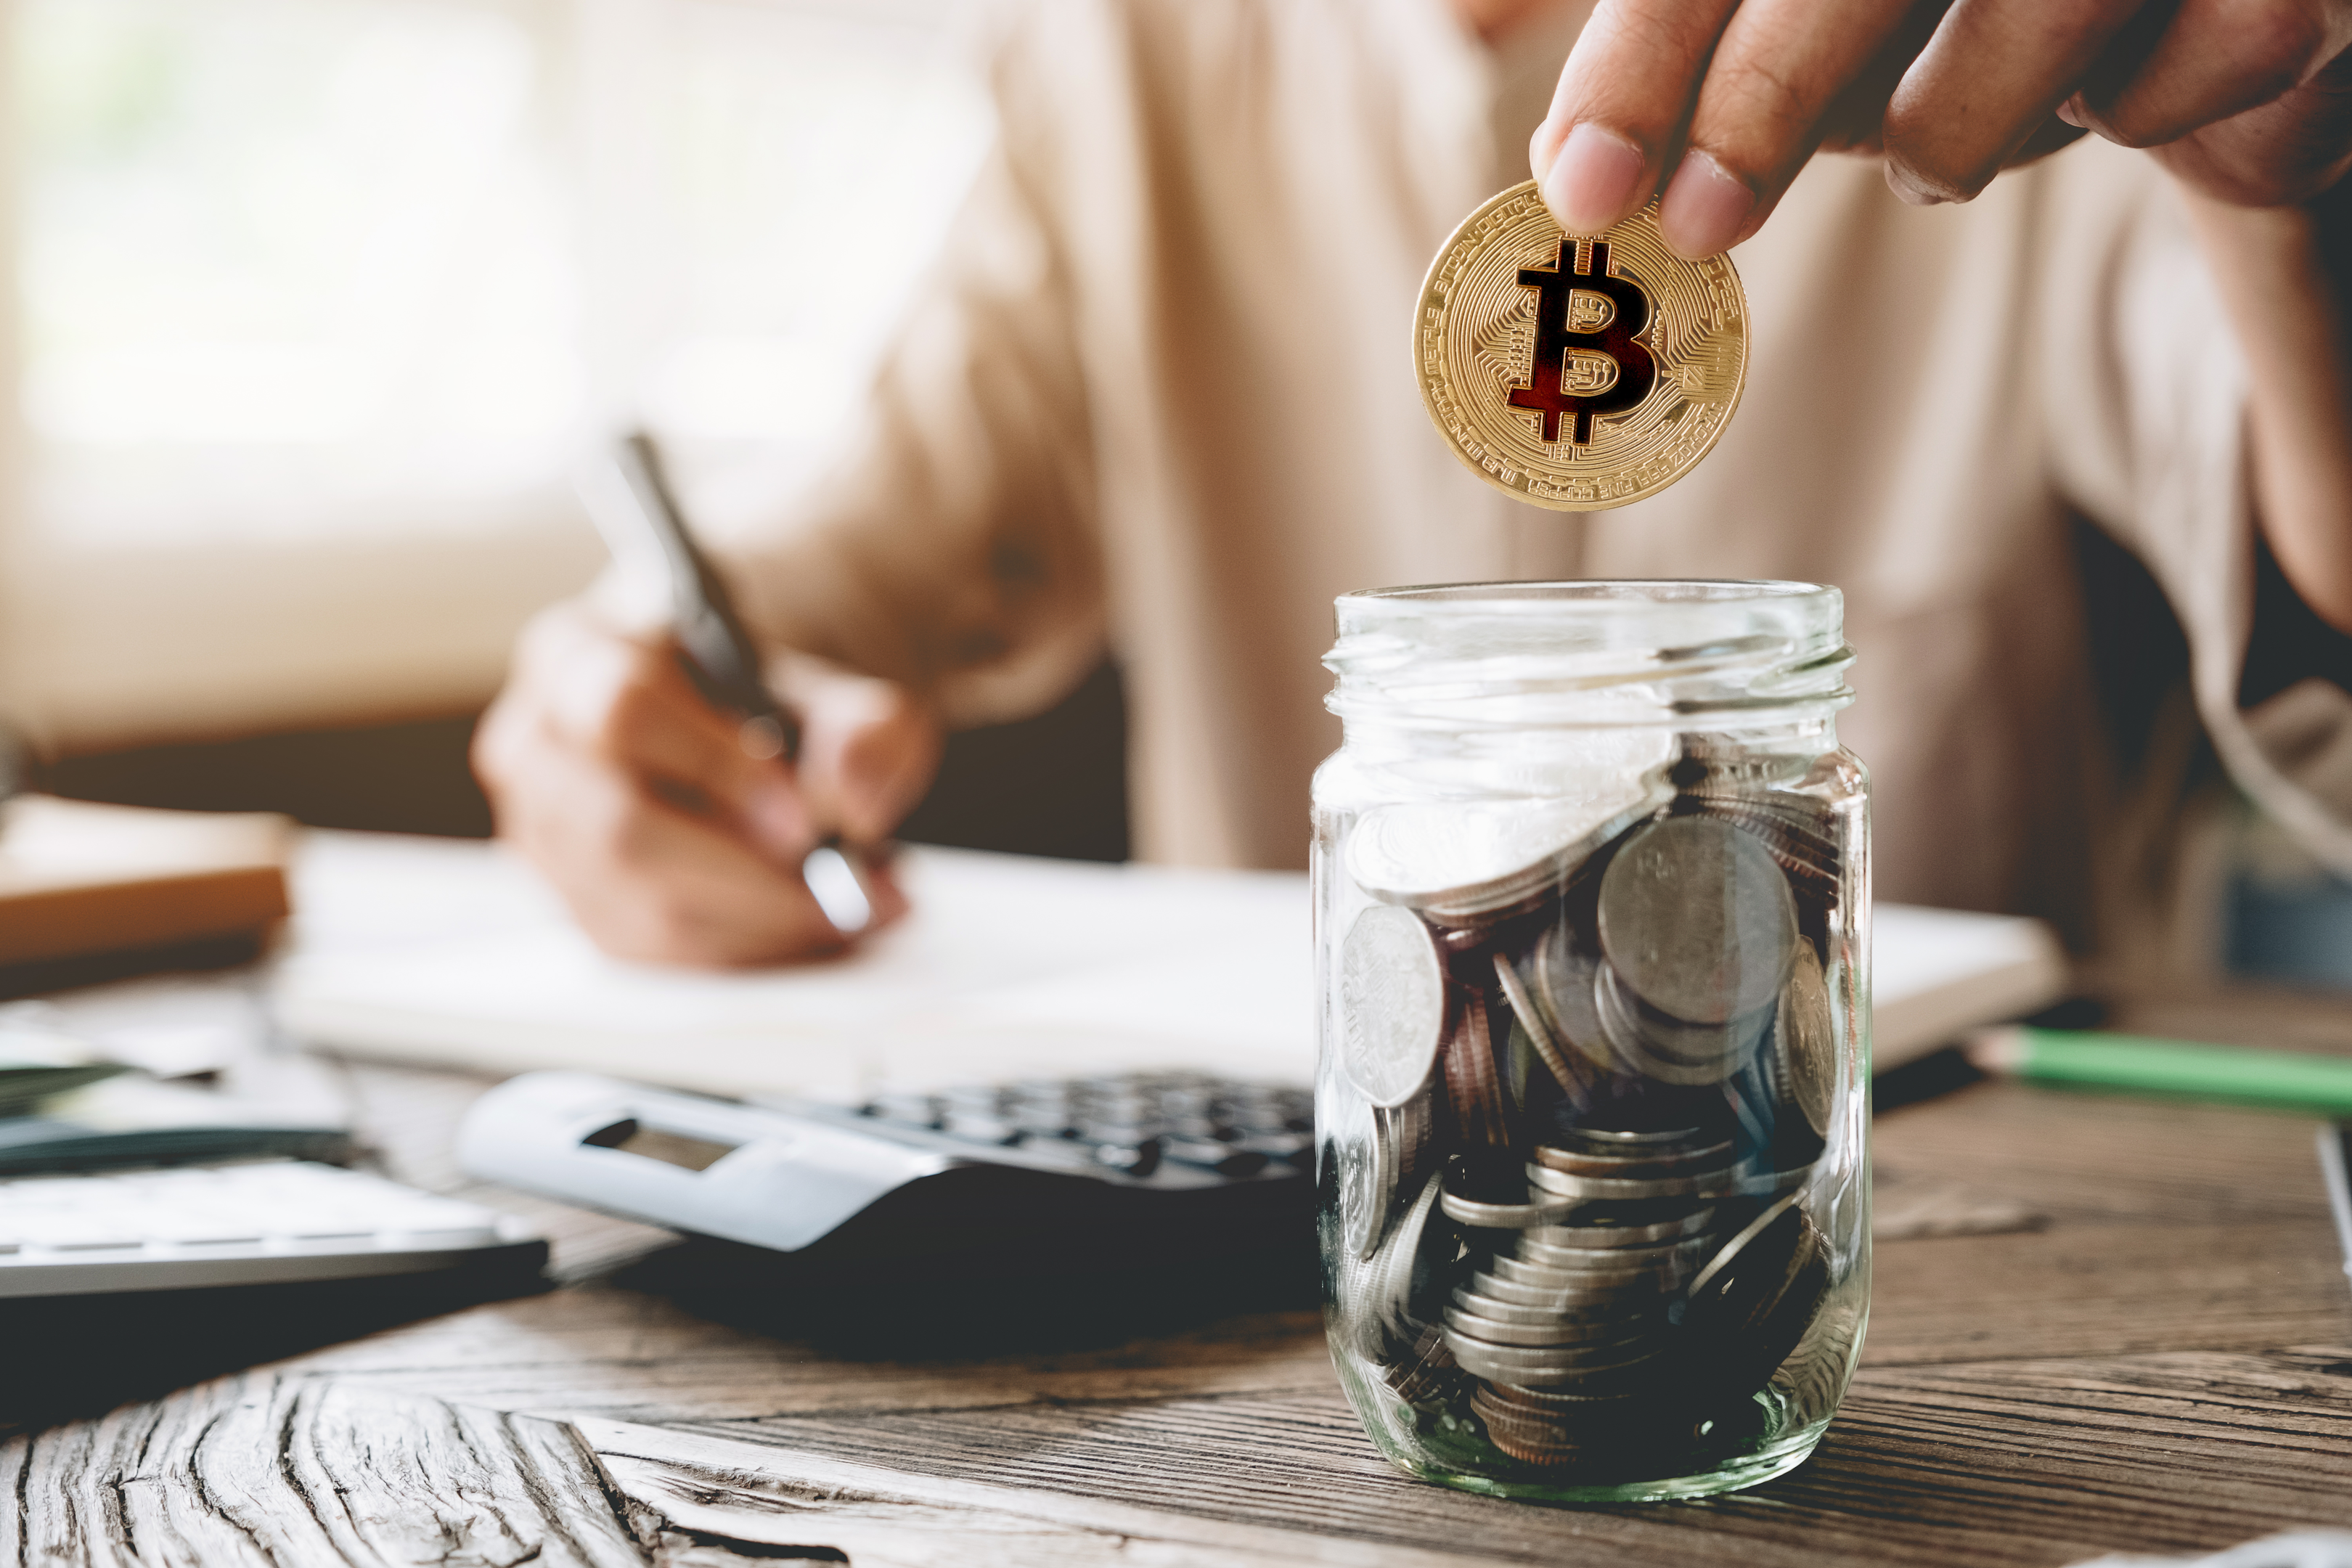 The tax implications of using crypto involves paying capital gains taxes